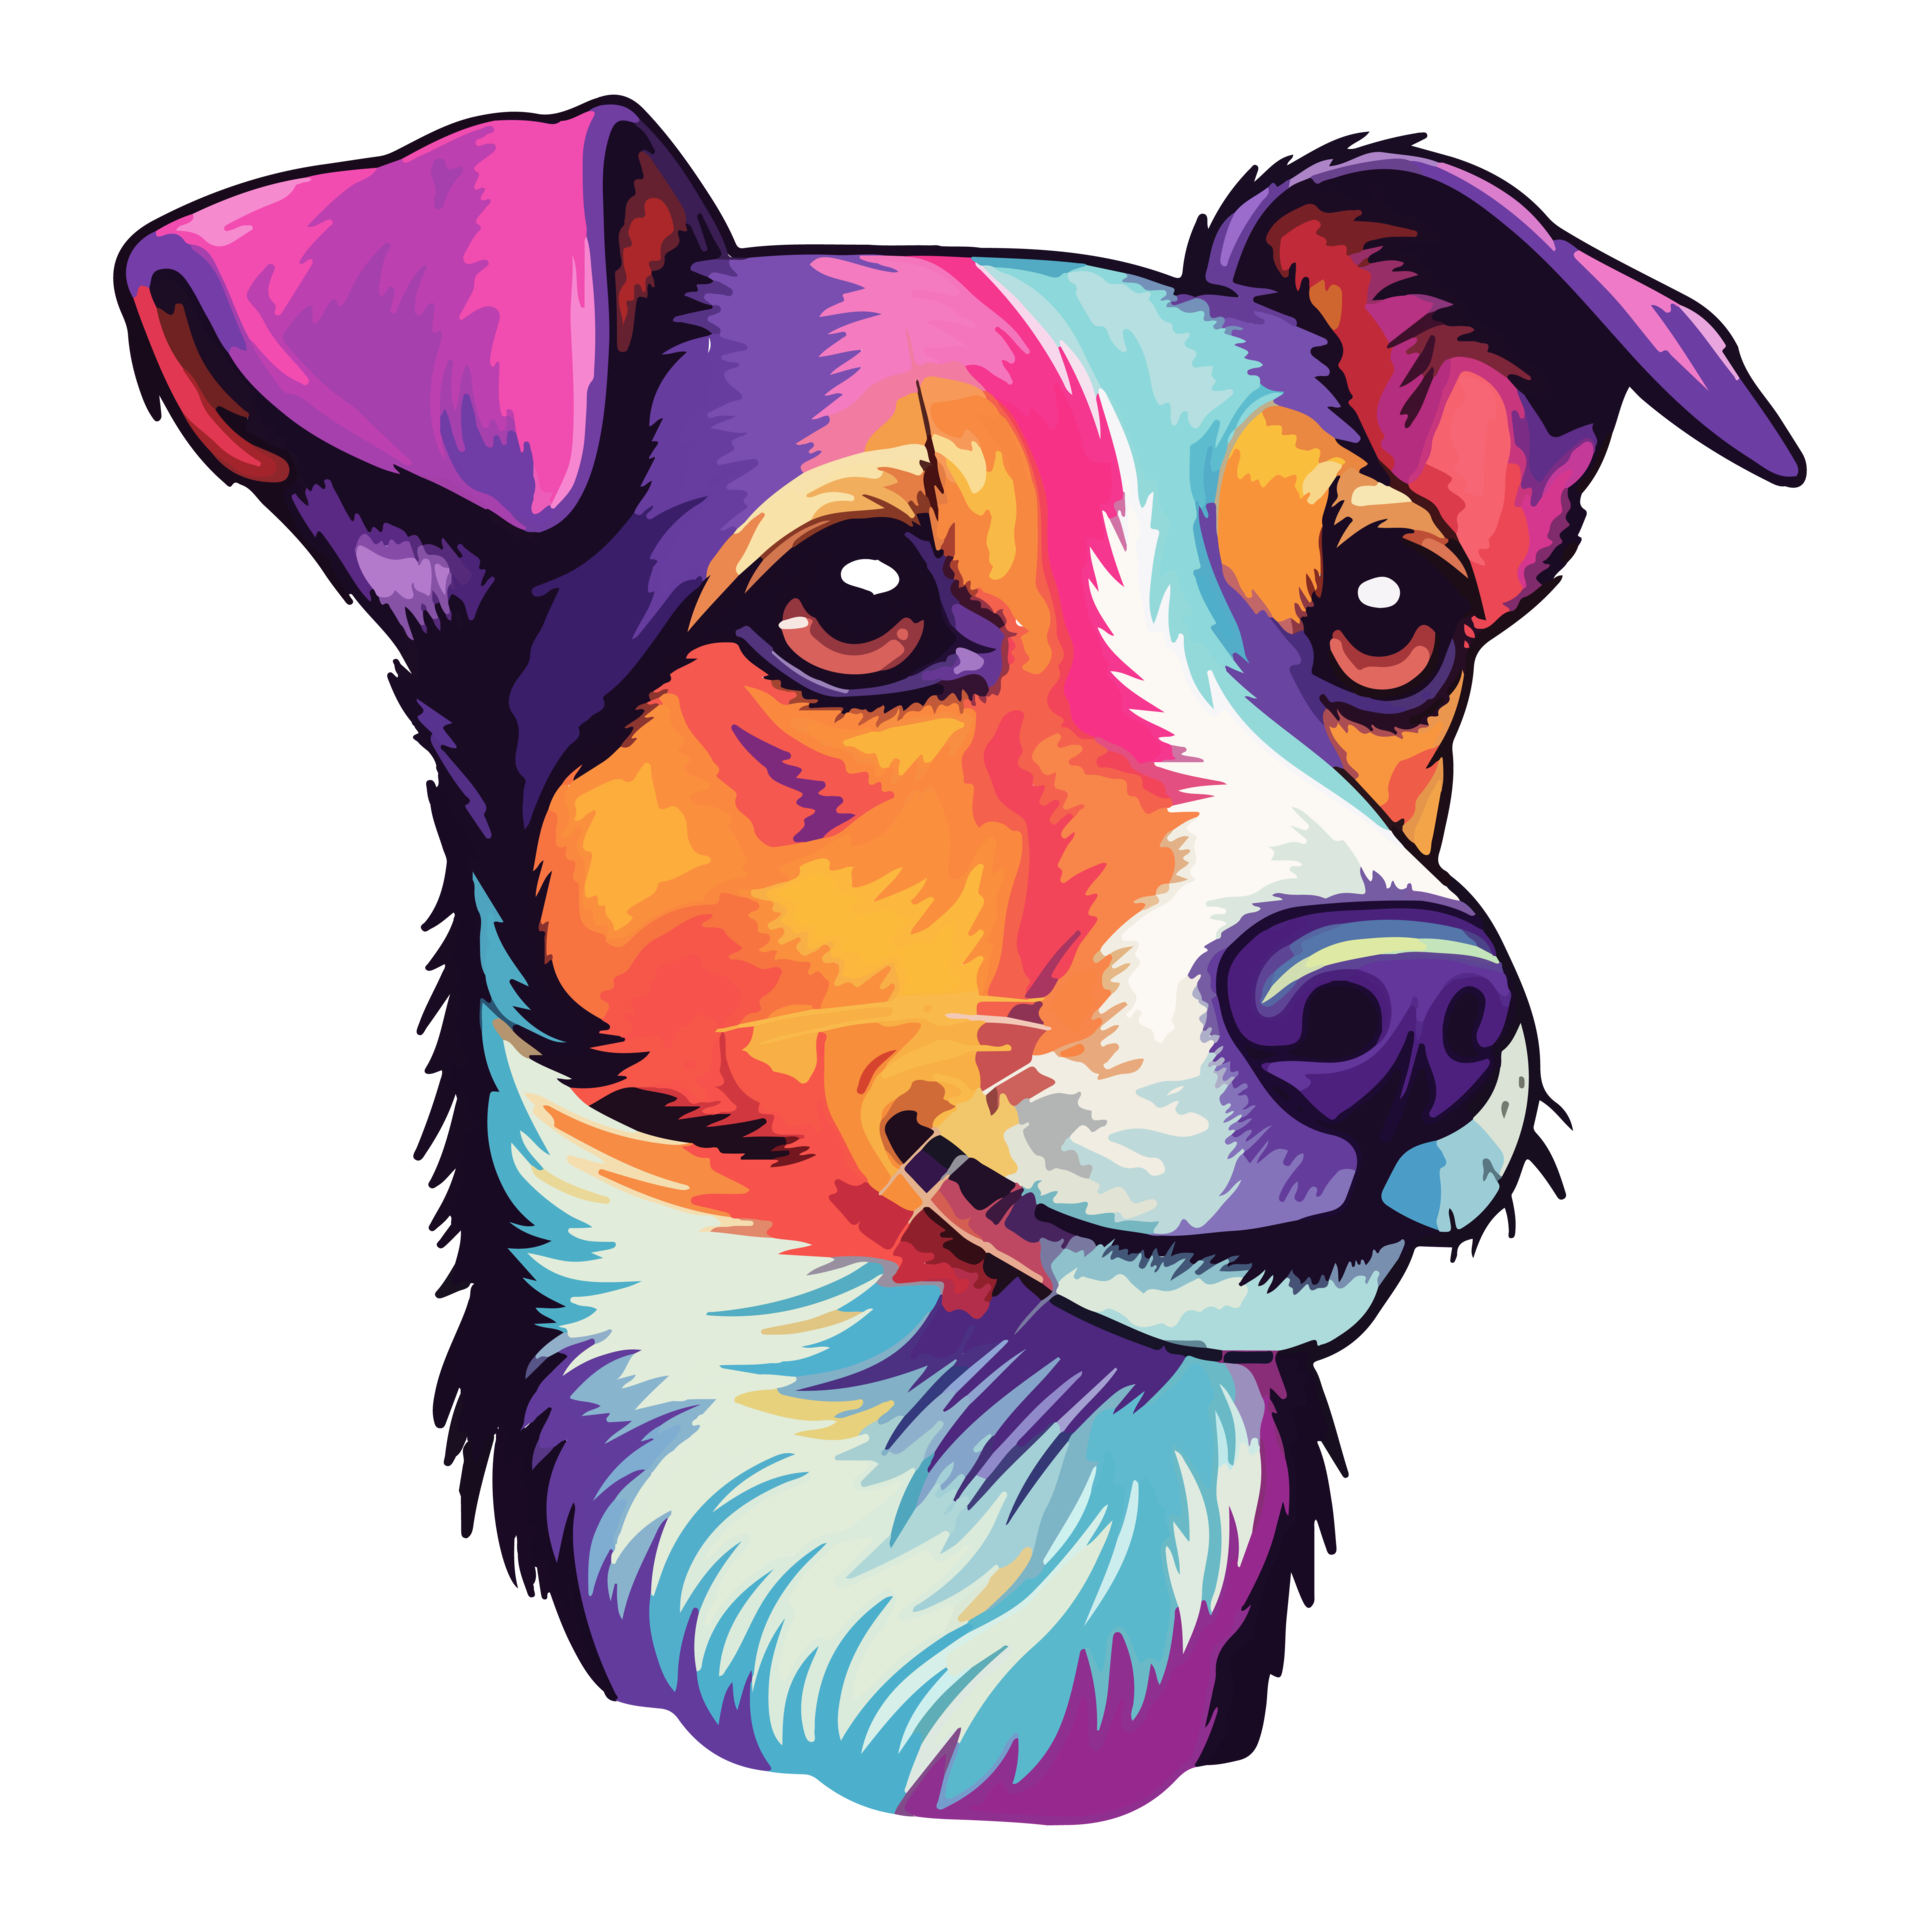 Colorful Jack Russell Terrier Dog, Jack Russell Terrier Portrait